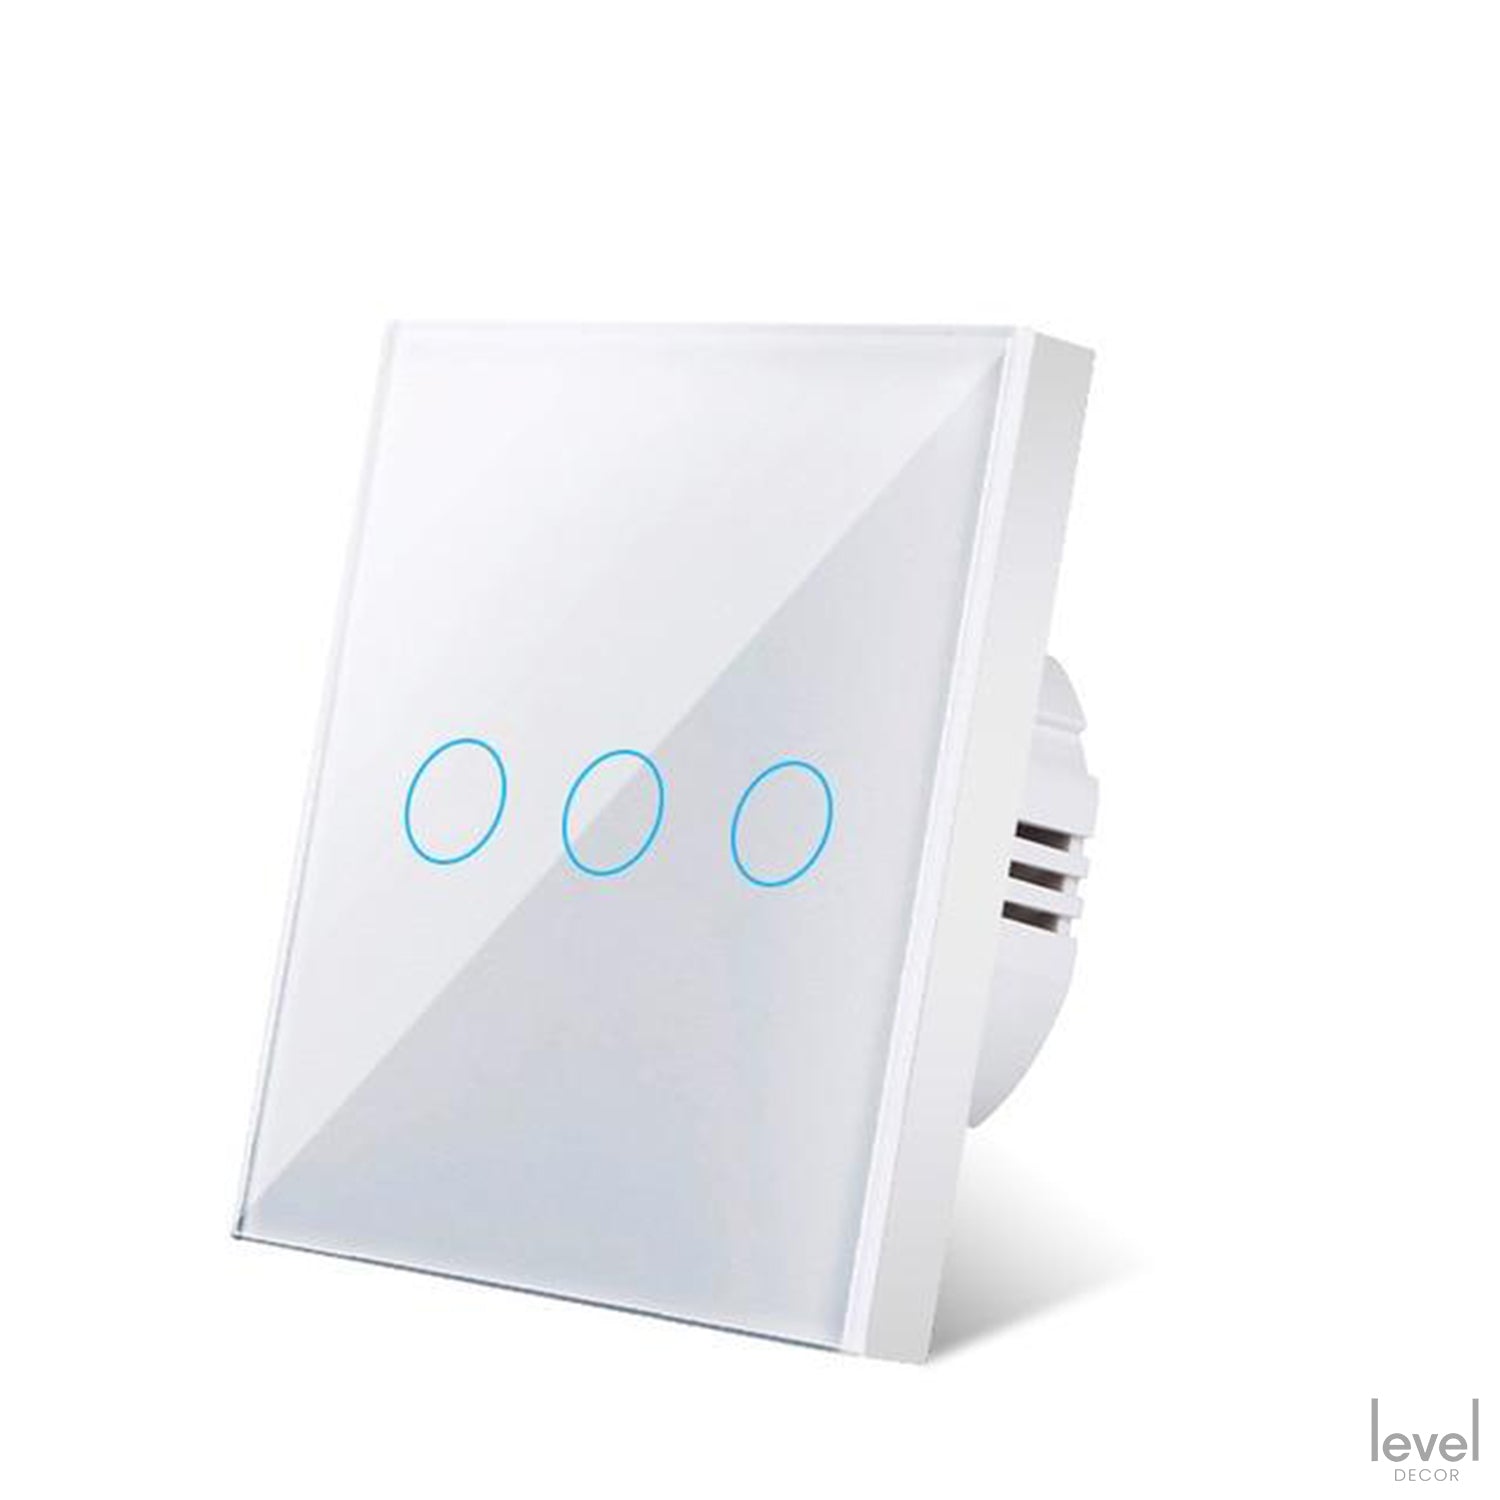 LED 2 Gang Crystal Tempered Glass Wall Light Touch Switch - White/White 3 Gang - Level Decor